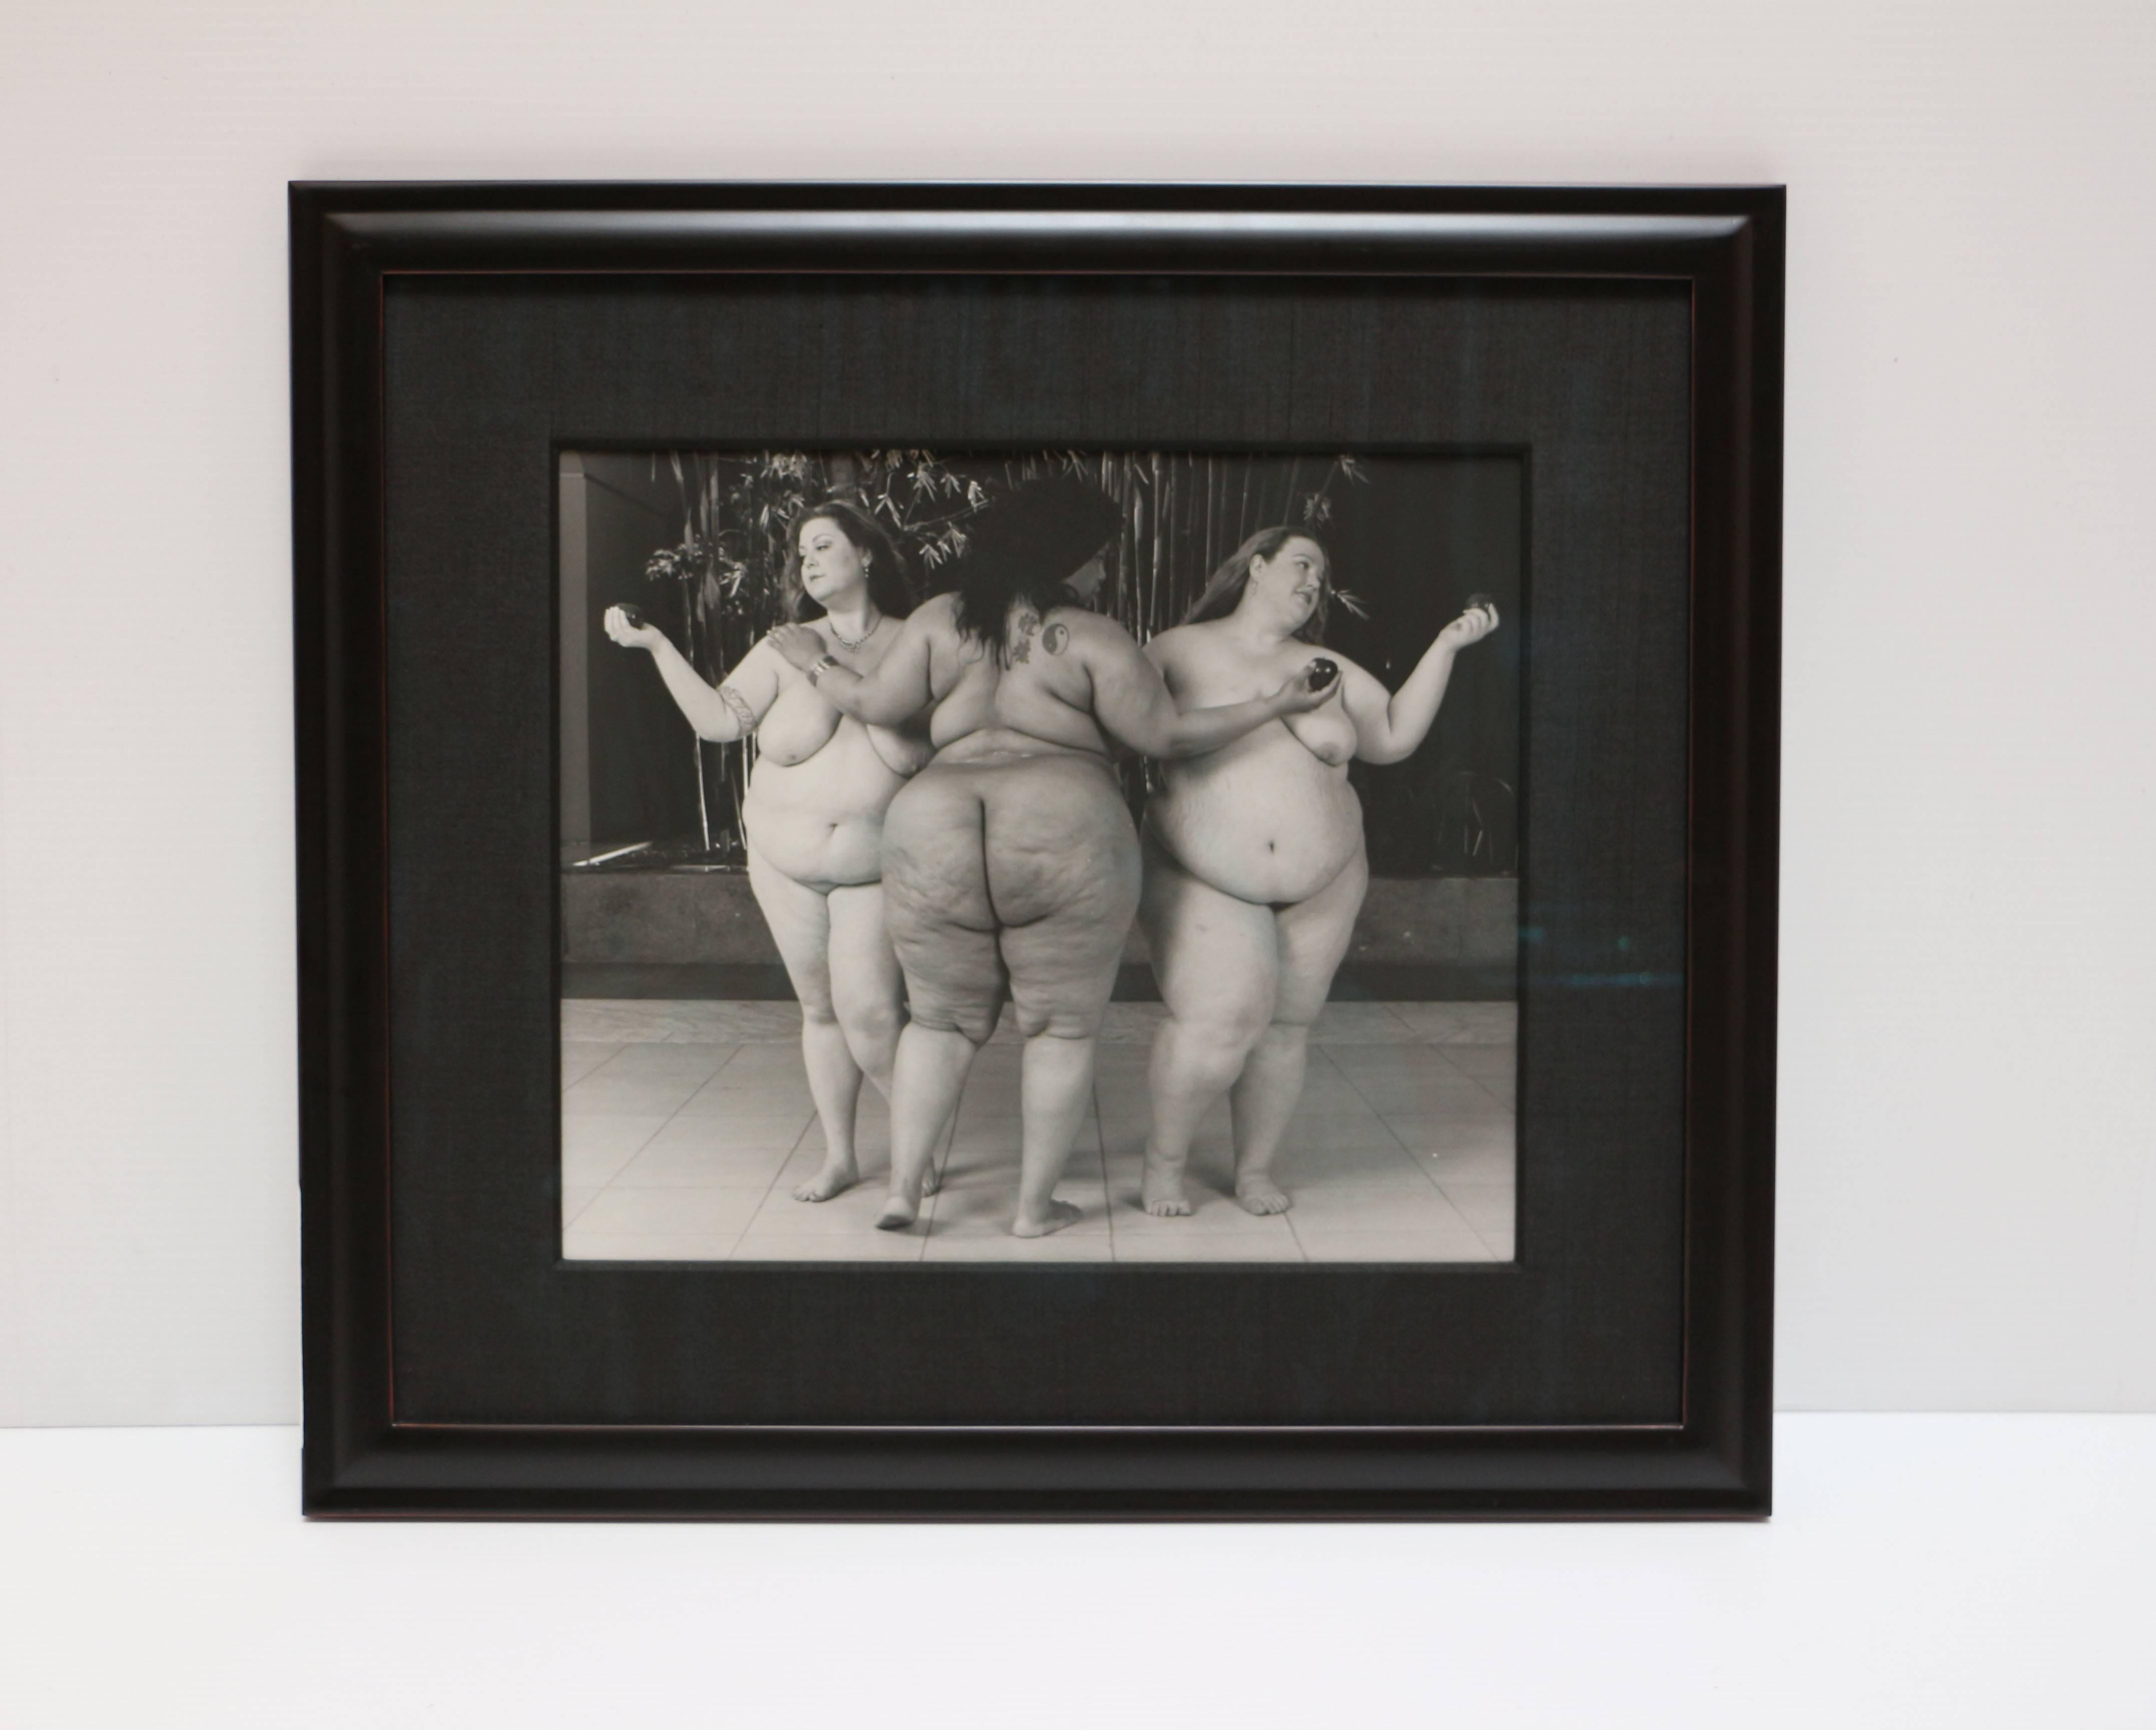 Three Graces, black and white print of three nude women with apples - Photograph by Leonard Nimoy